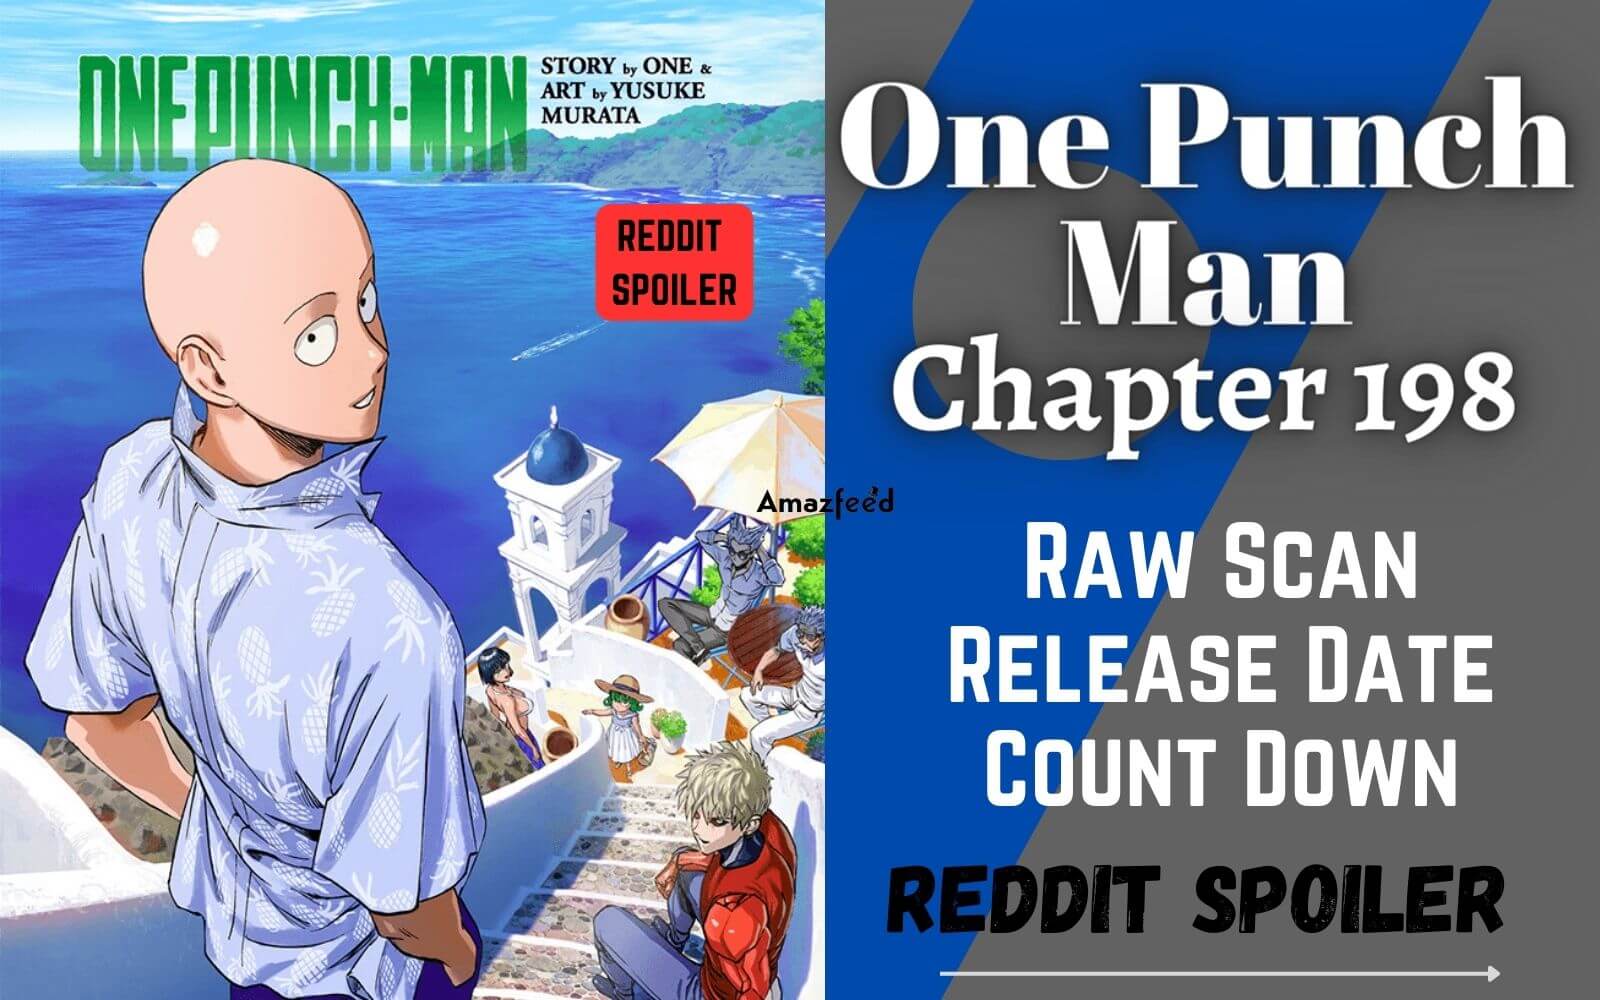 New chapter🔥 #newchapter #onepunchman #fyp #manga #anime #viral #sait